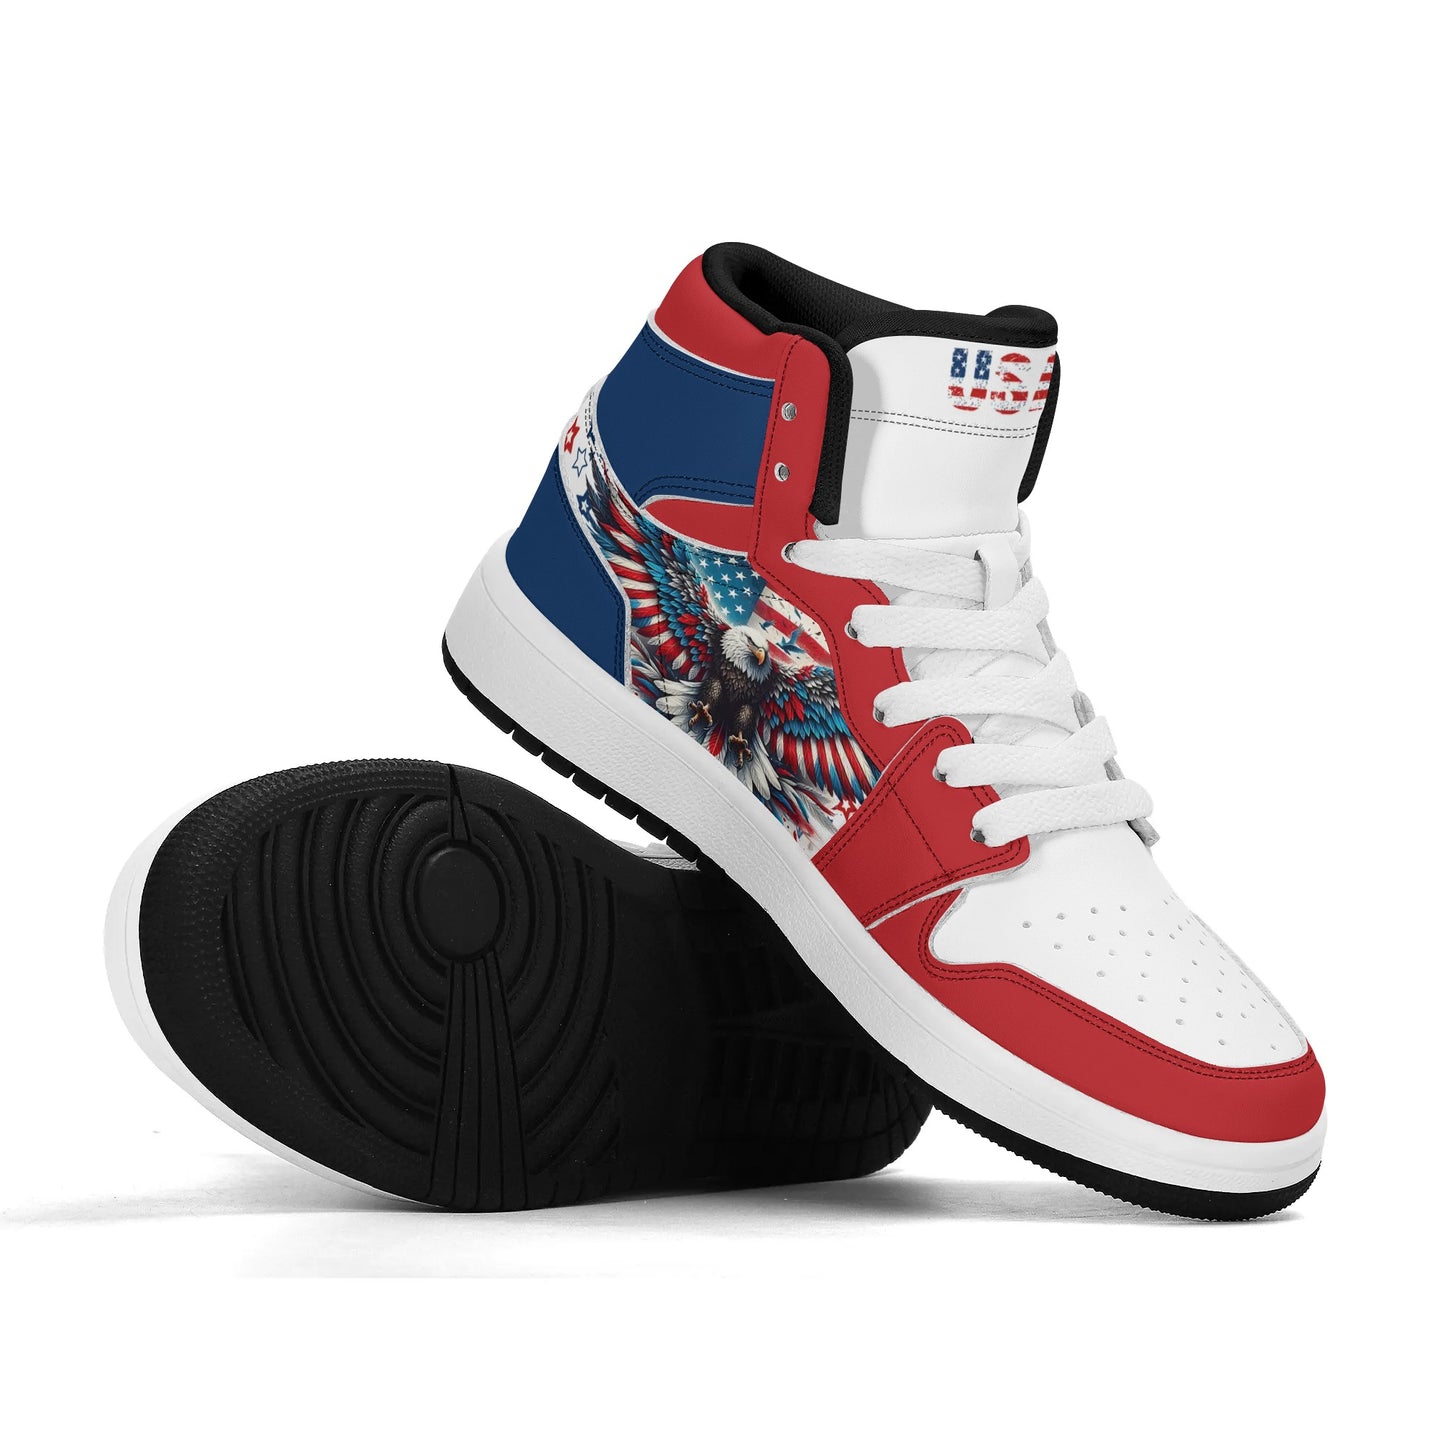 Youth Team High Top Basketball Shoes